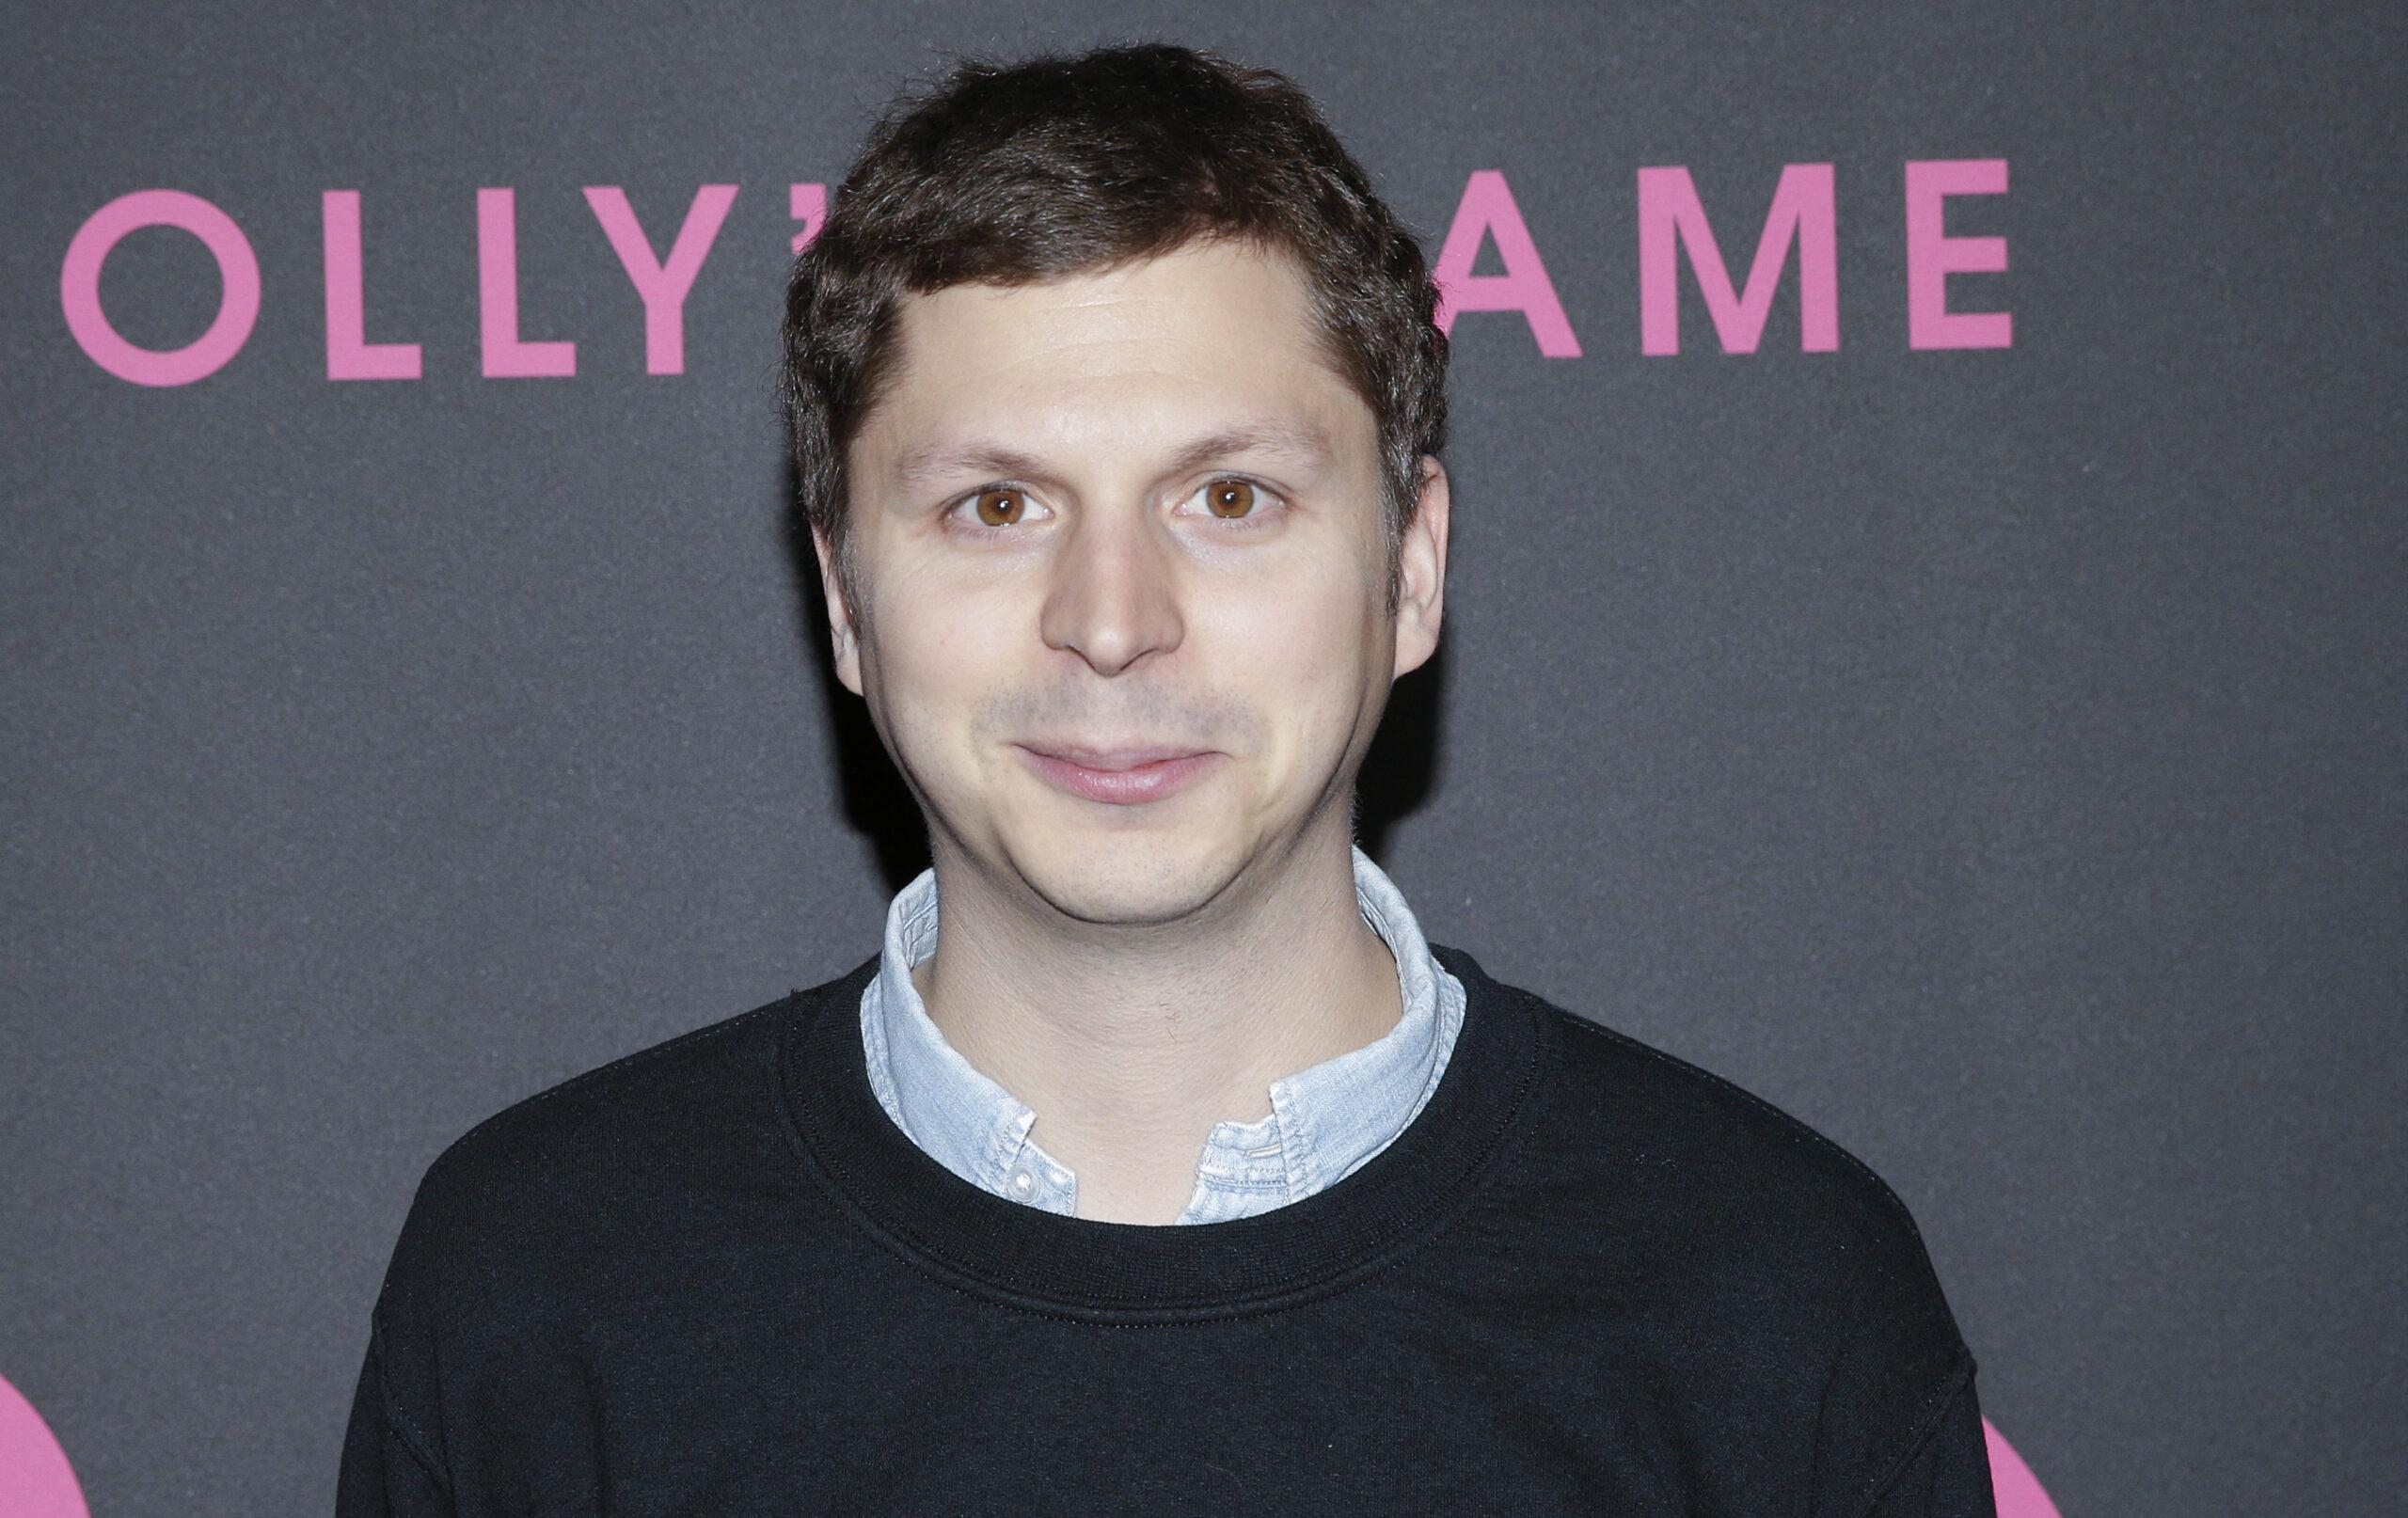 Michael Cera Shares How He Almost 'Spontaneously' Married Aubrey Plaza